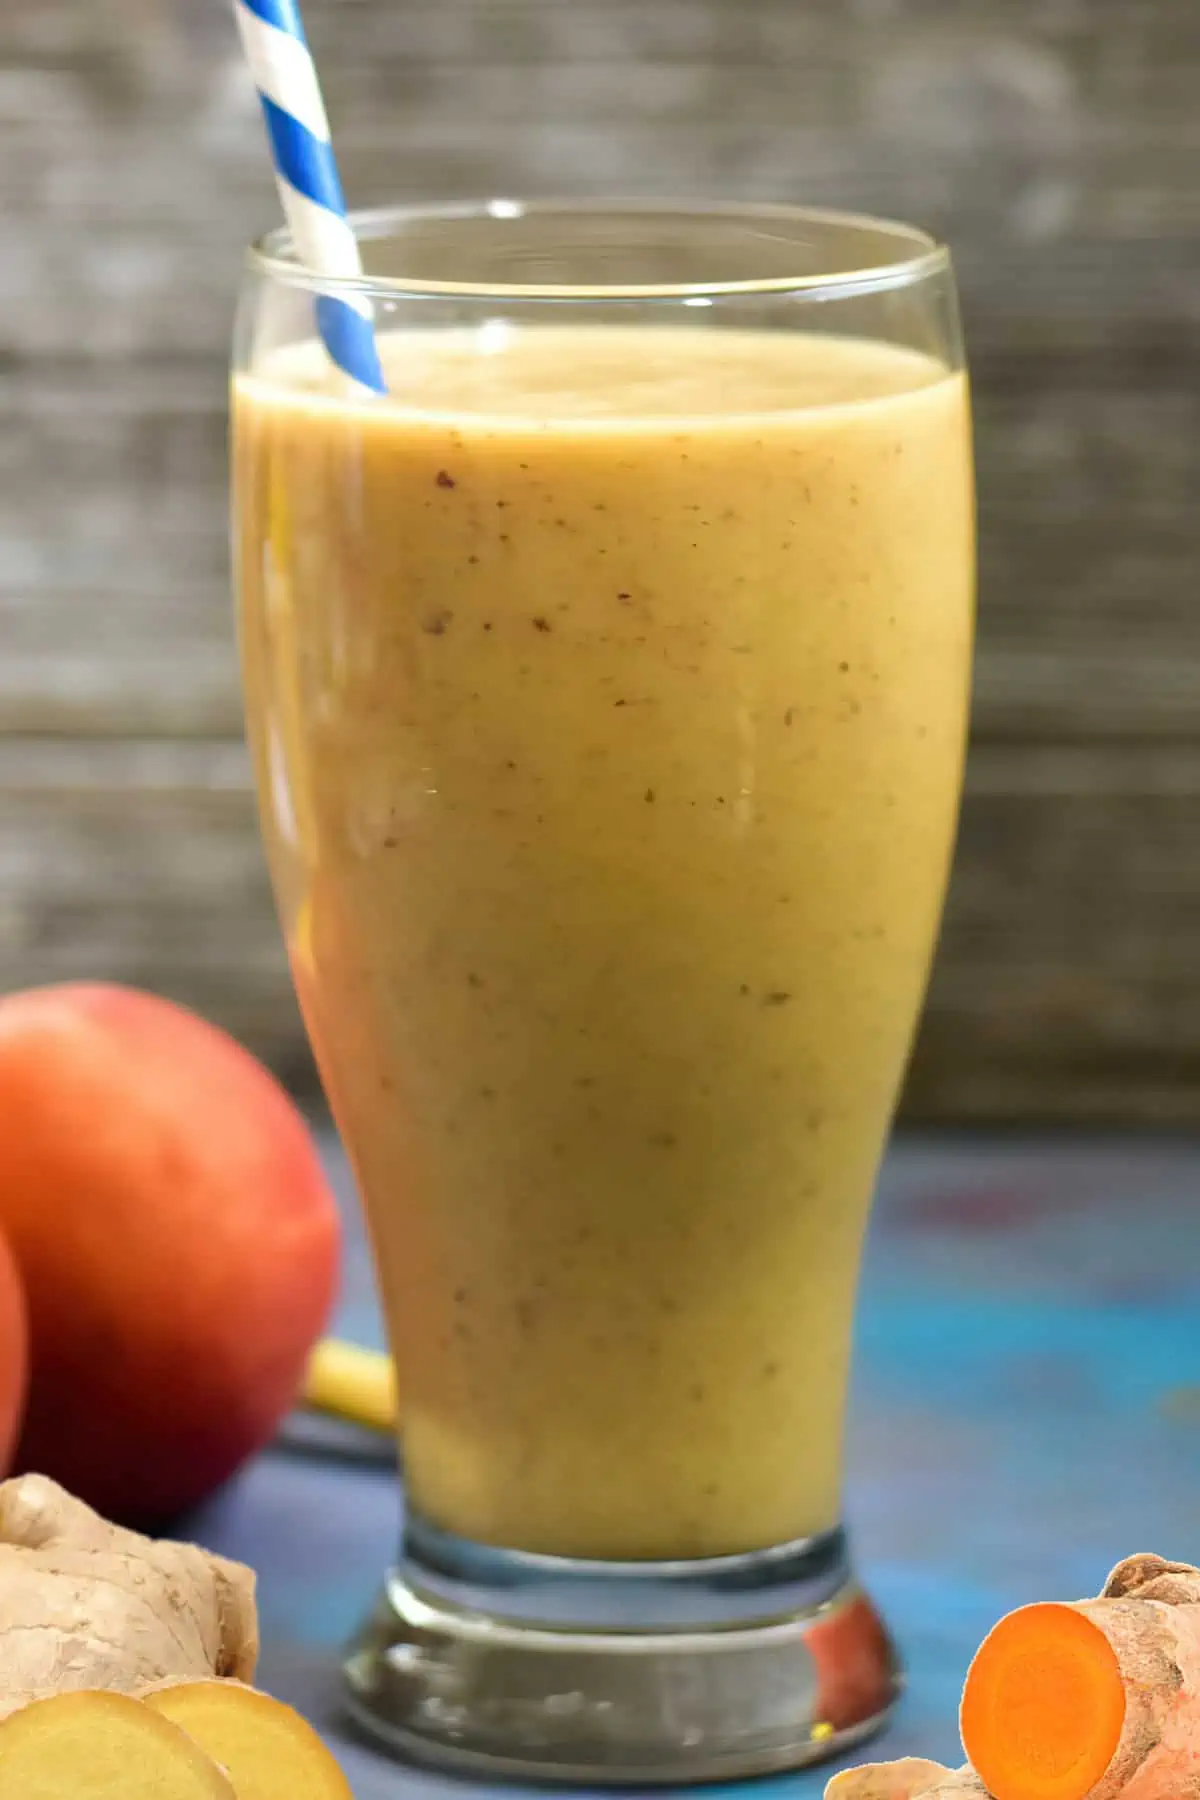 NutriBullet Lucky Charmed Smoothie